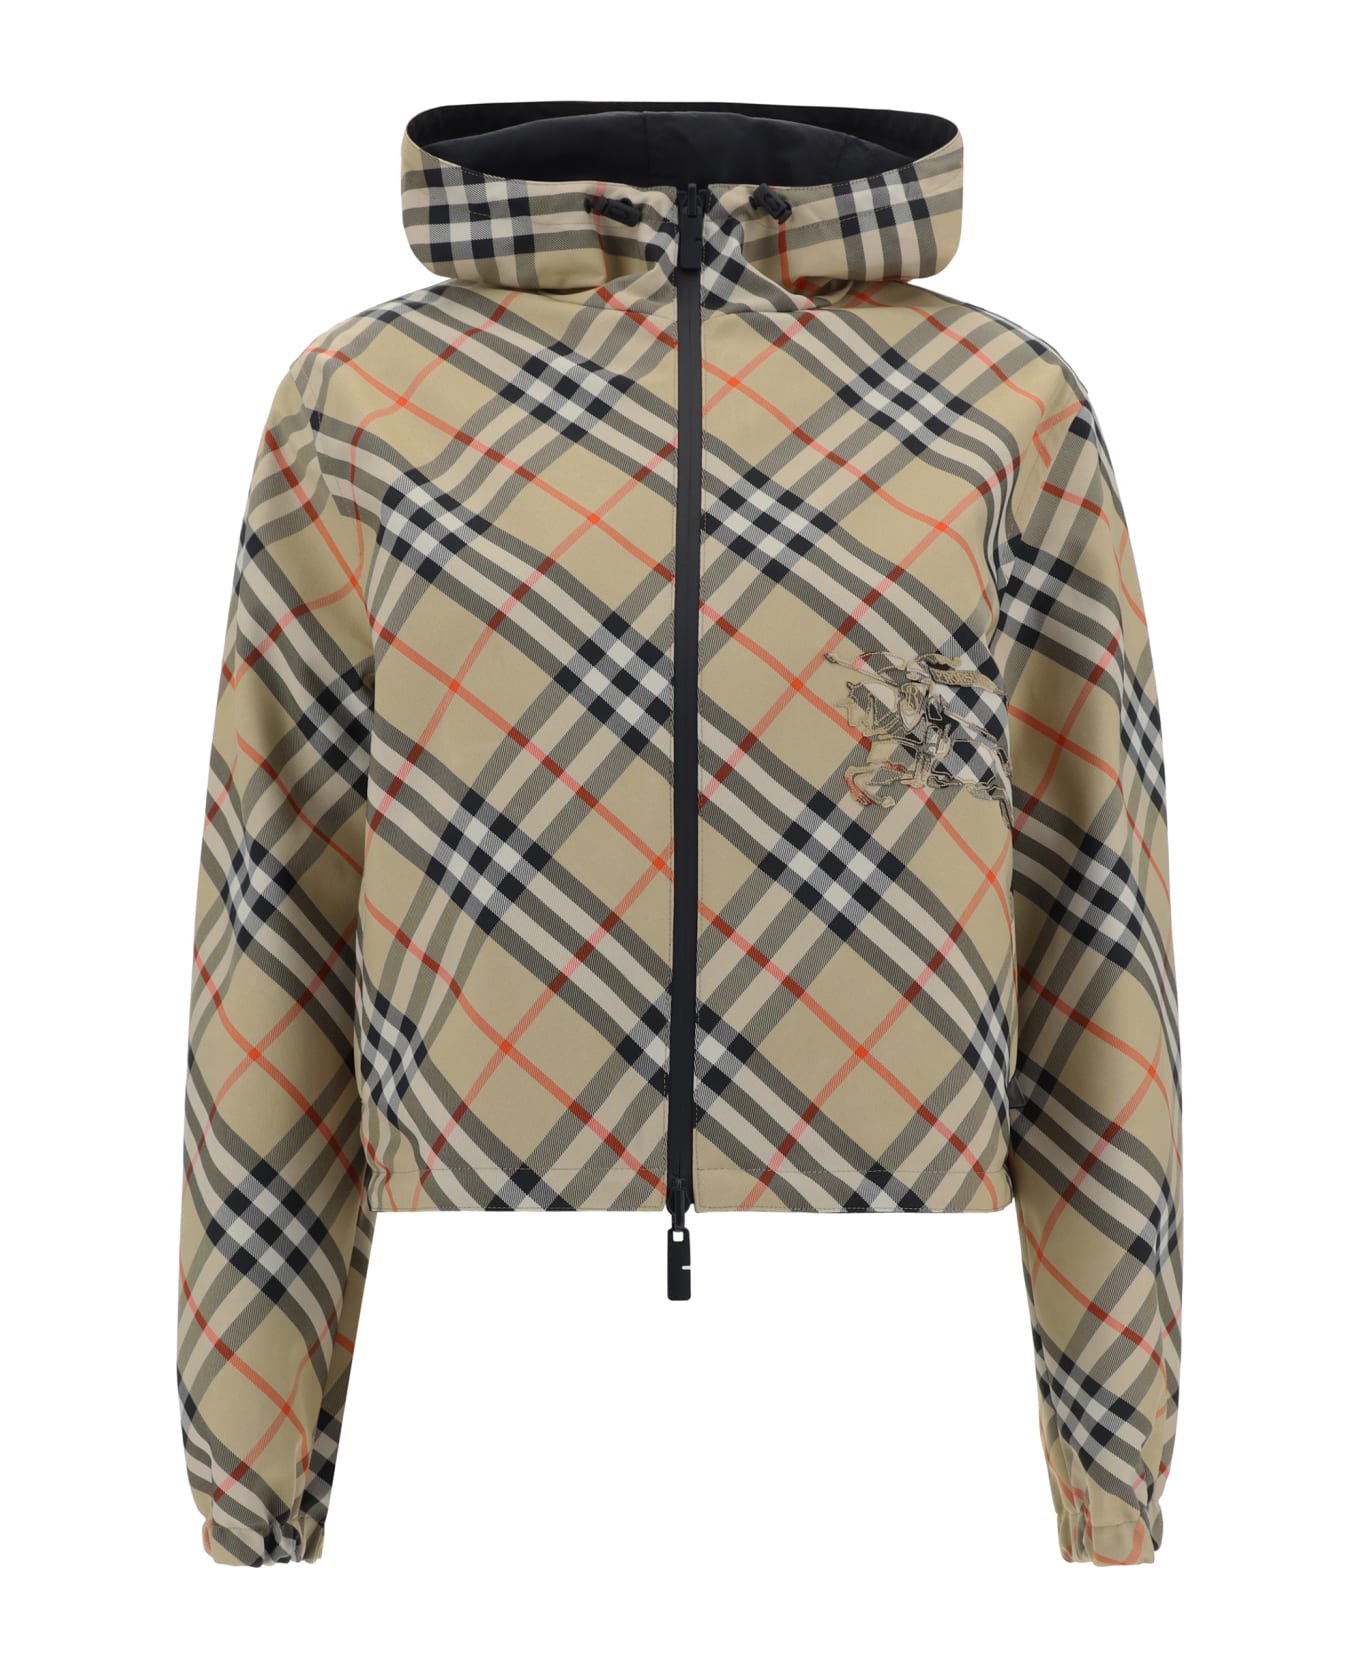 Burberry Reversible Hooded Jacket - Sand Ip Check ジャケット